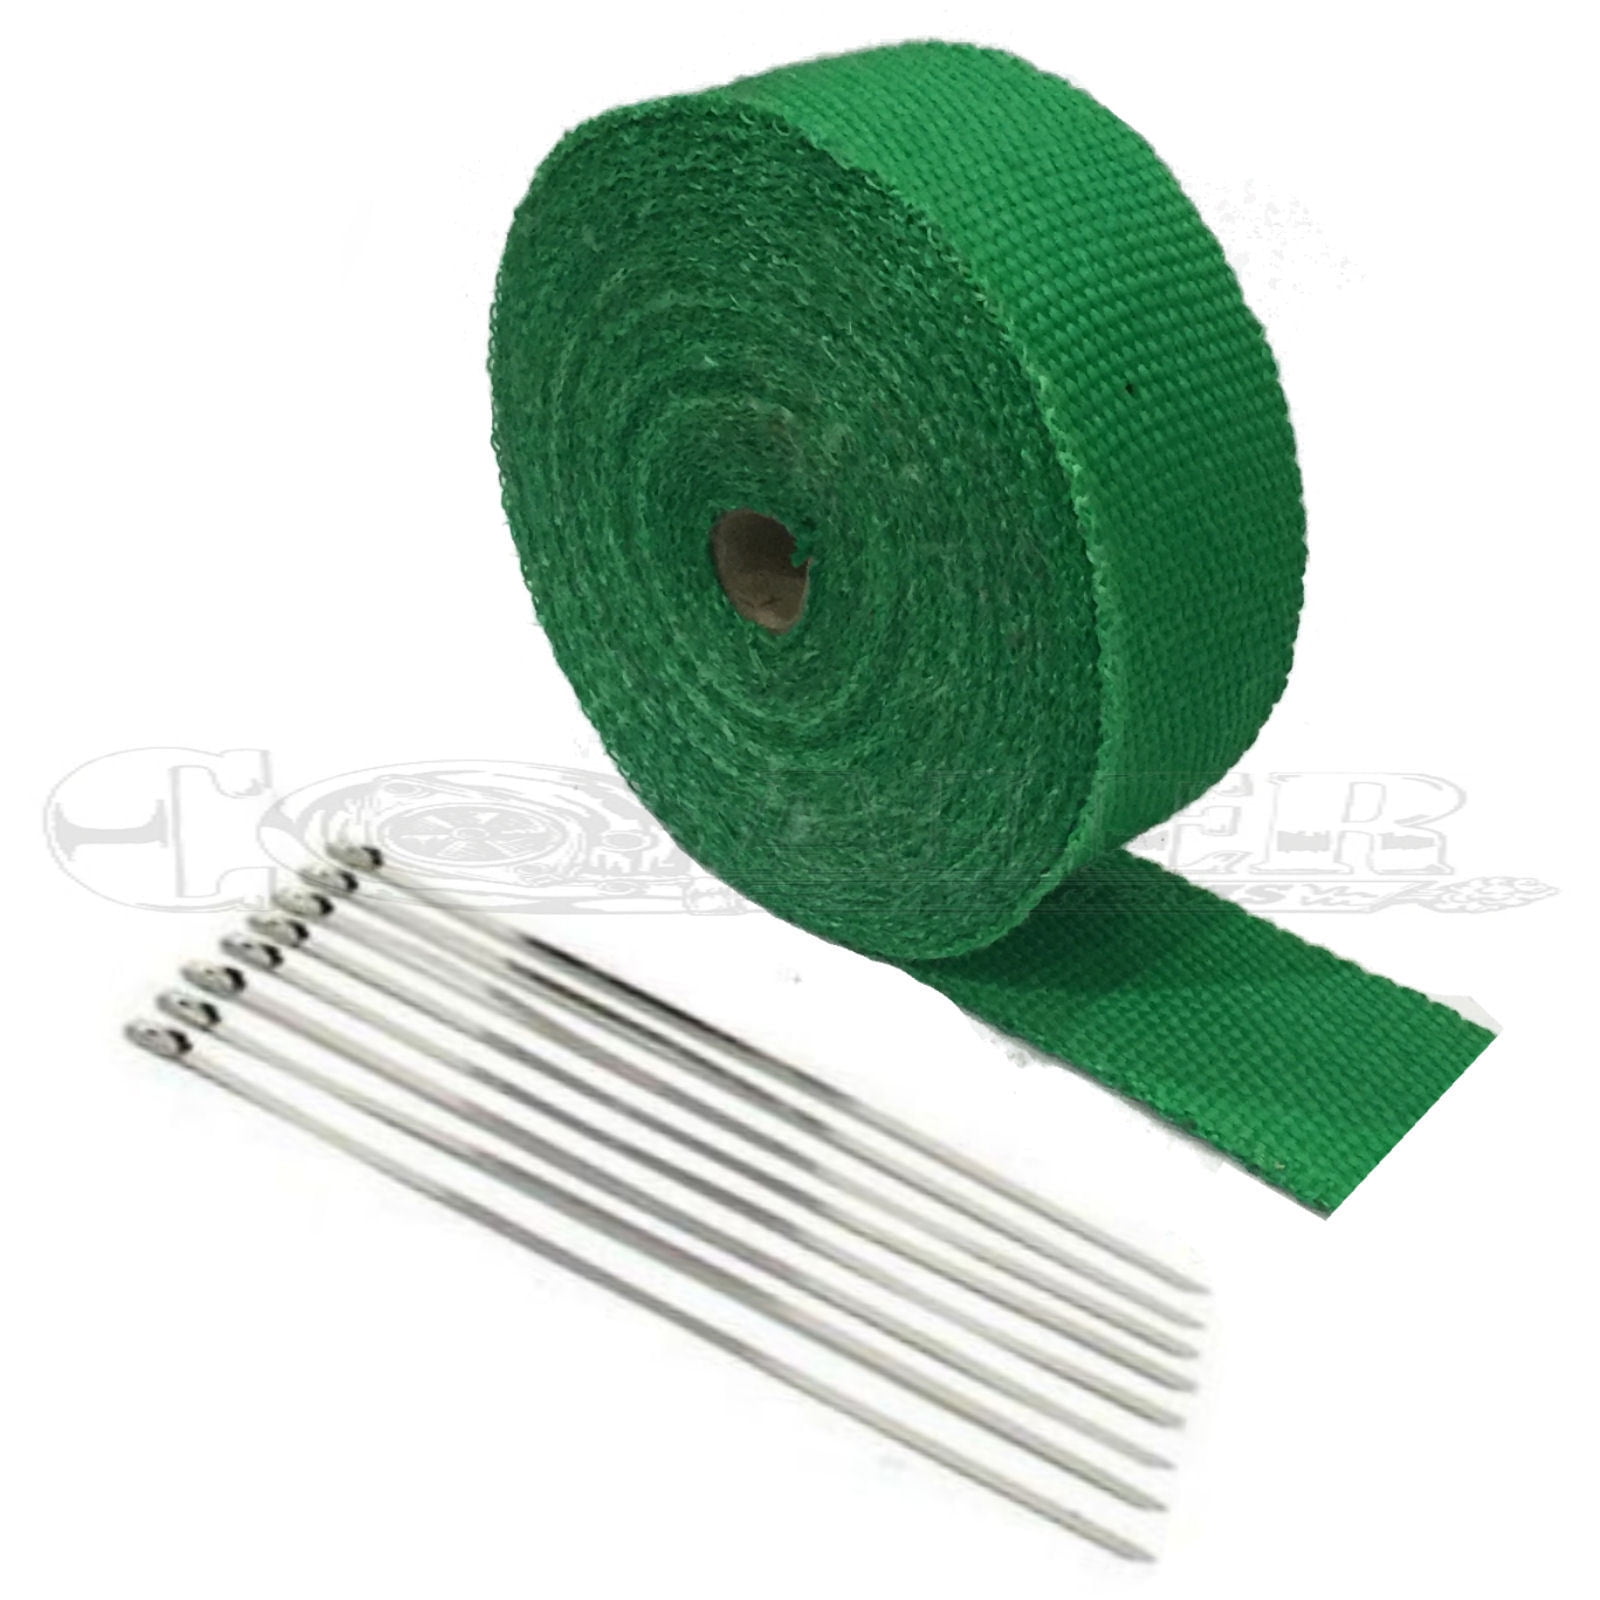 12" 12 PCS STAINLESS CABLE ZIP TIE STRAPS CATBACK EXHAUST MUFFLER OR HEAT WRAP 